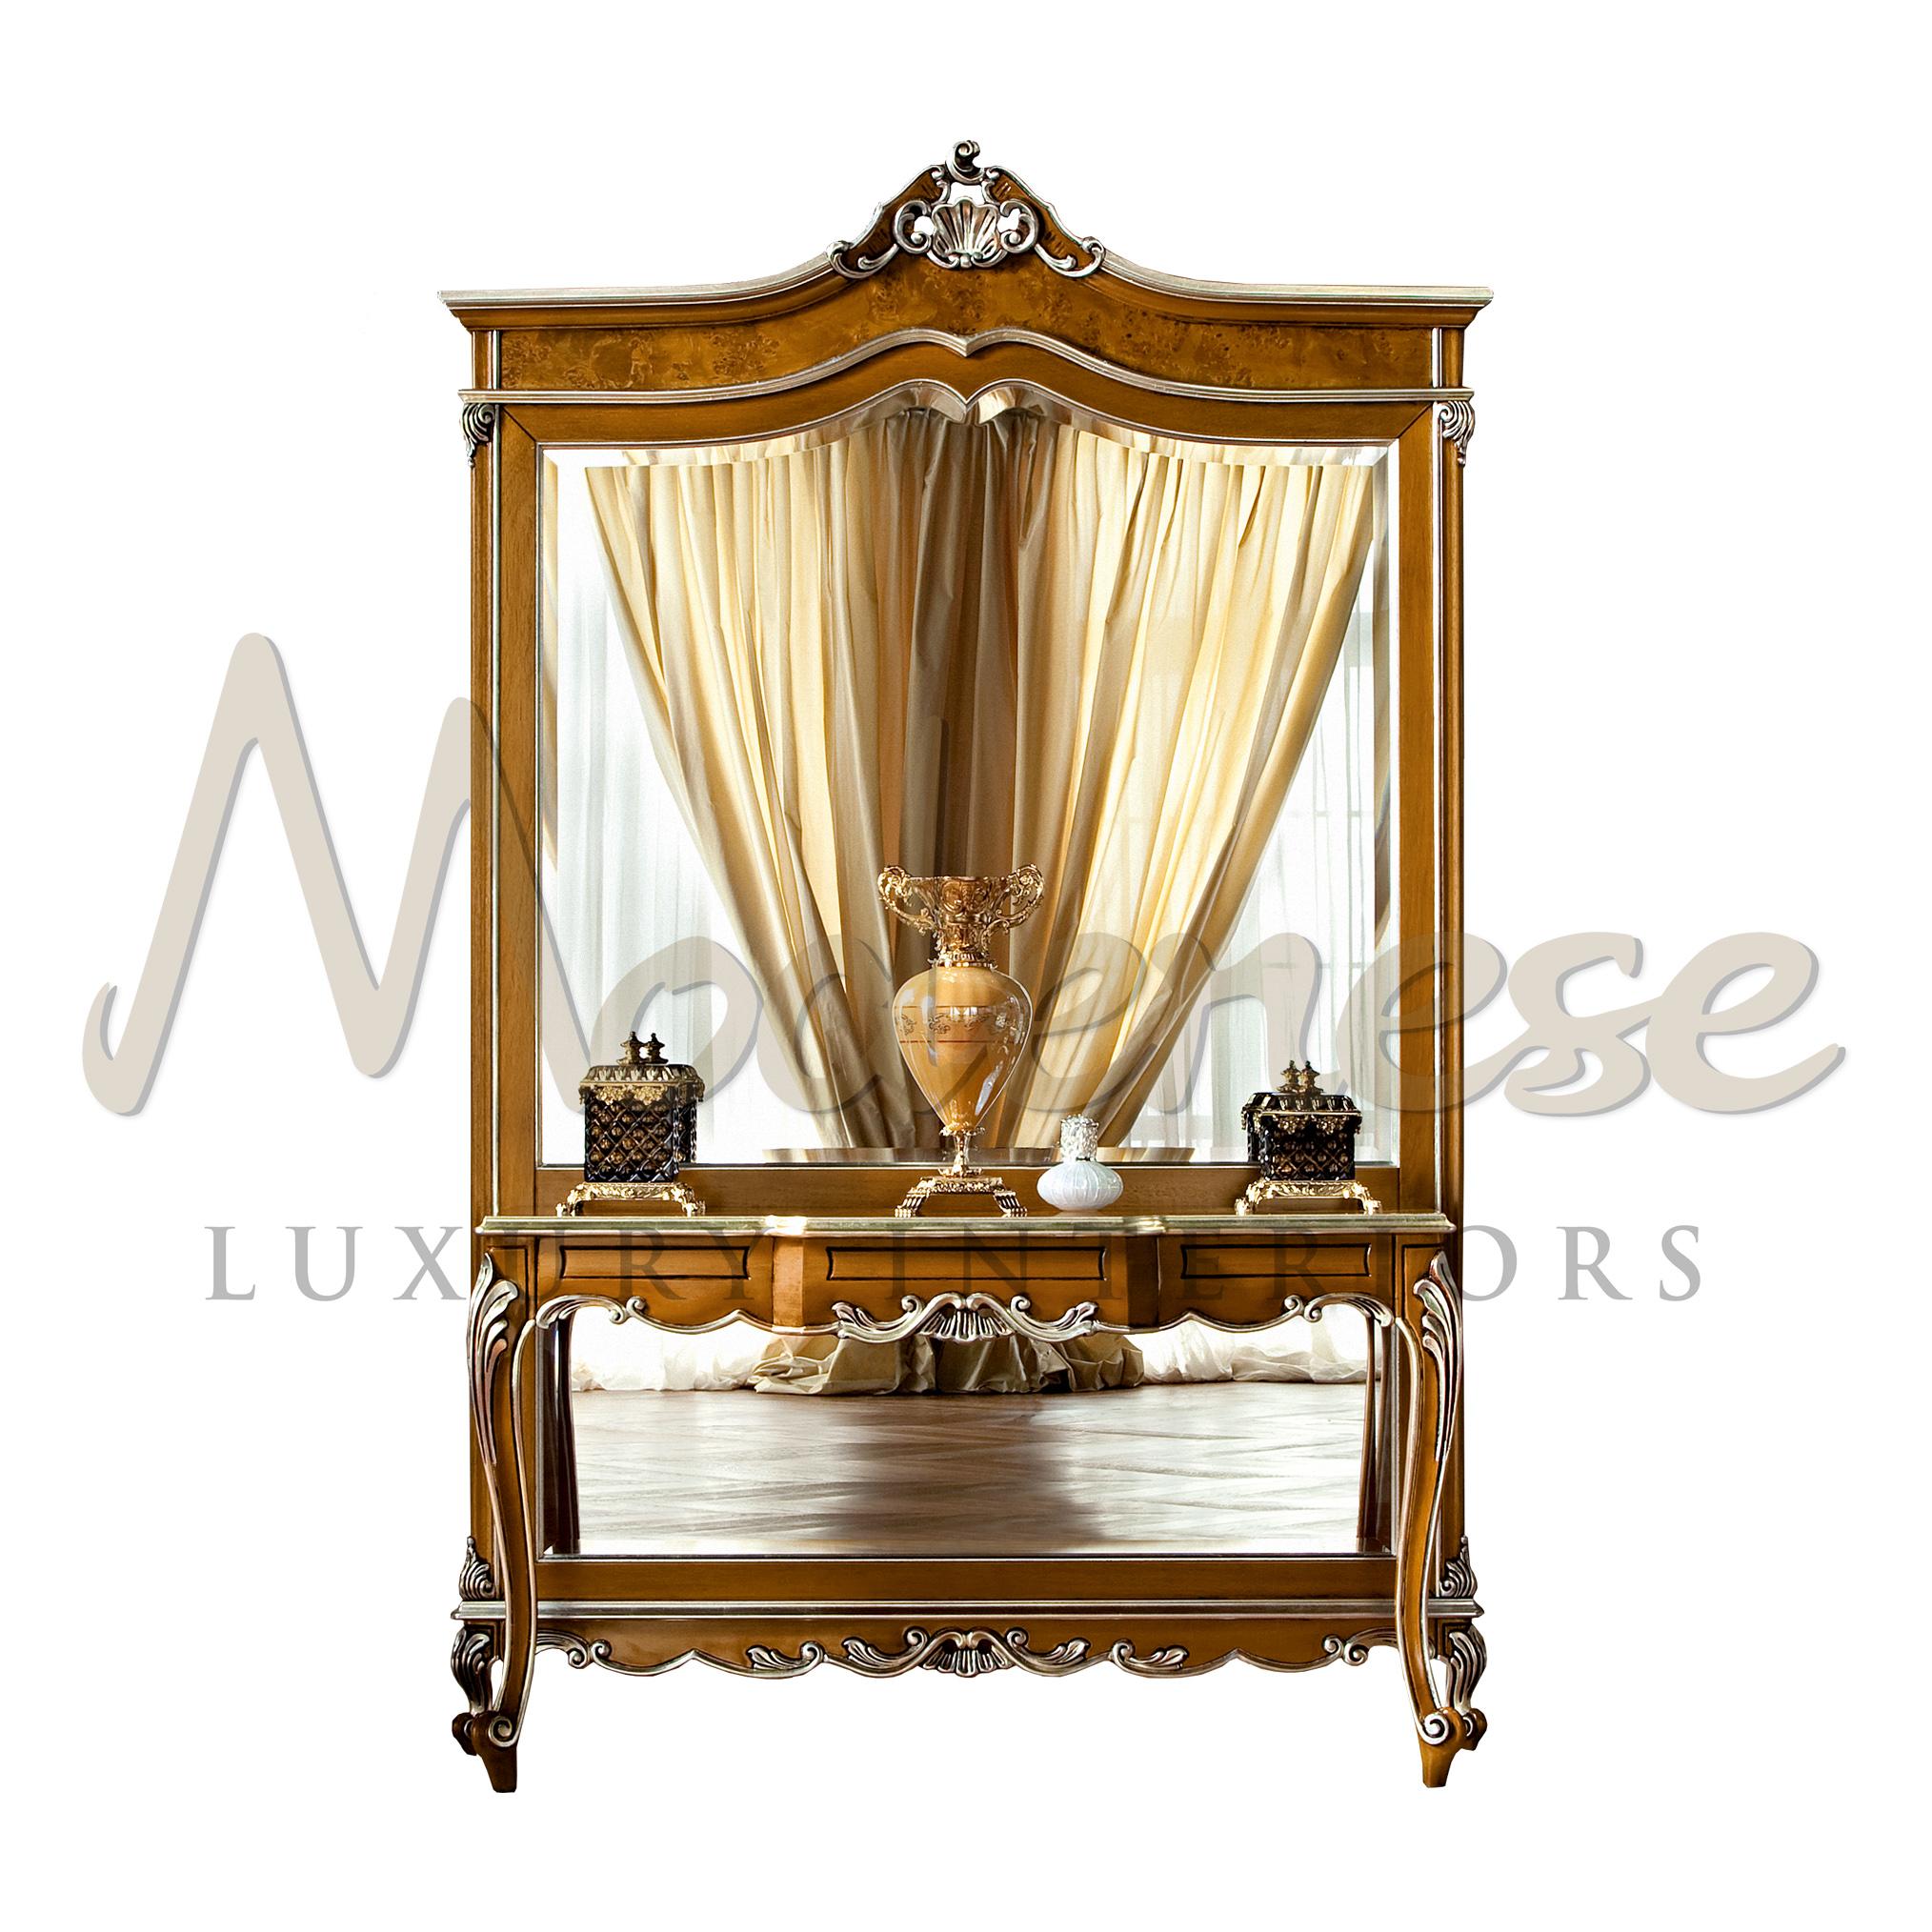 Rococo Neo-Classical Natural Walnut Finish Console with Silver Leaf Decorations For Sale